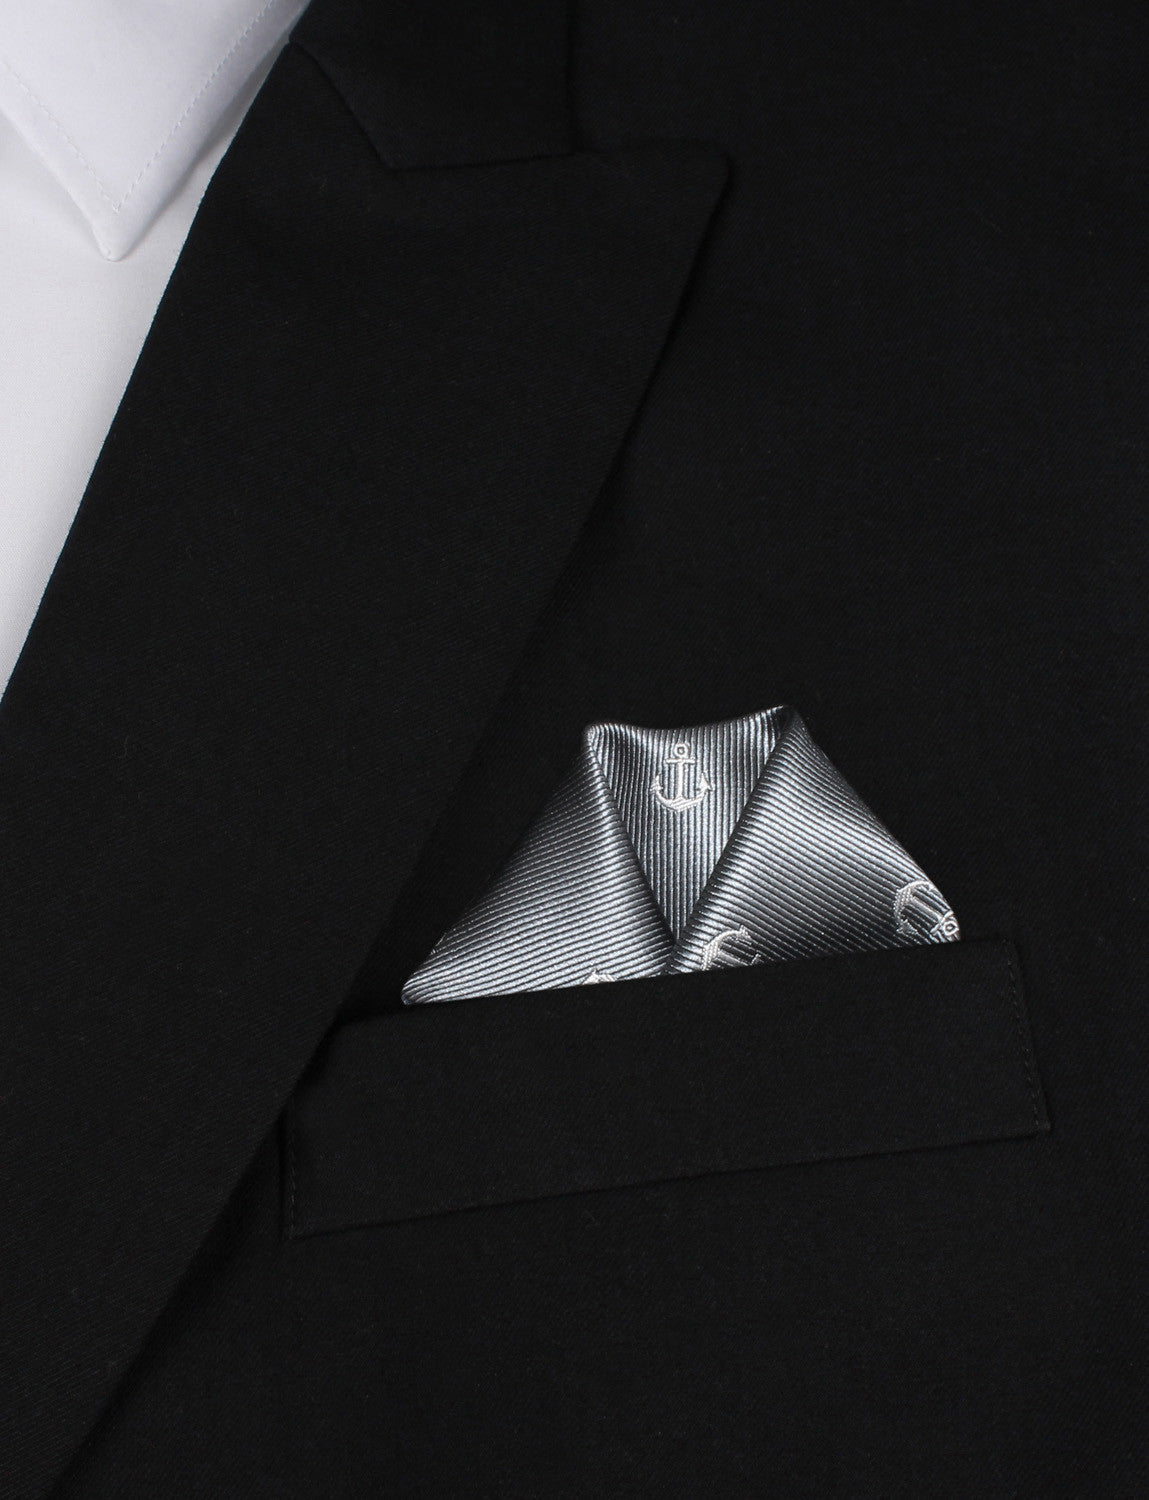 The OTAA Charcoal Grey Anchor Pocket Square